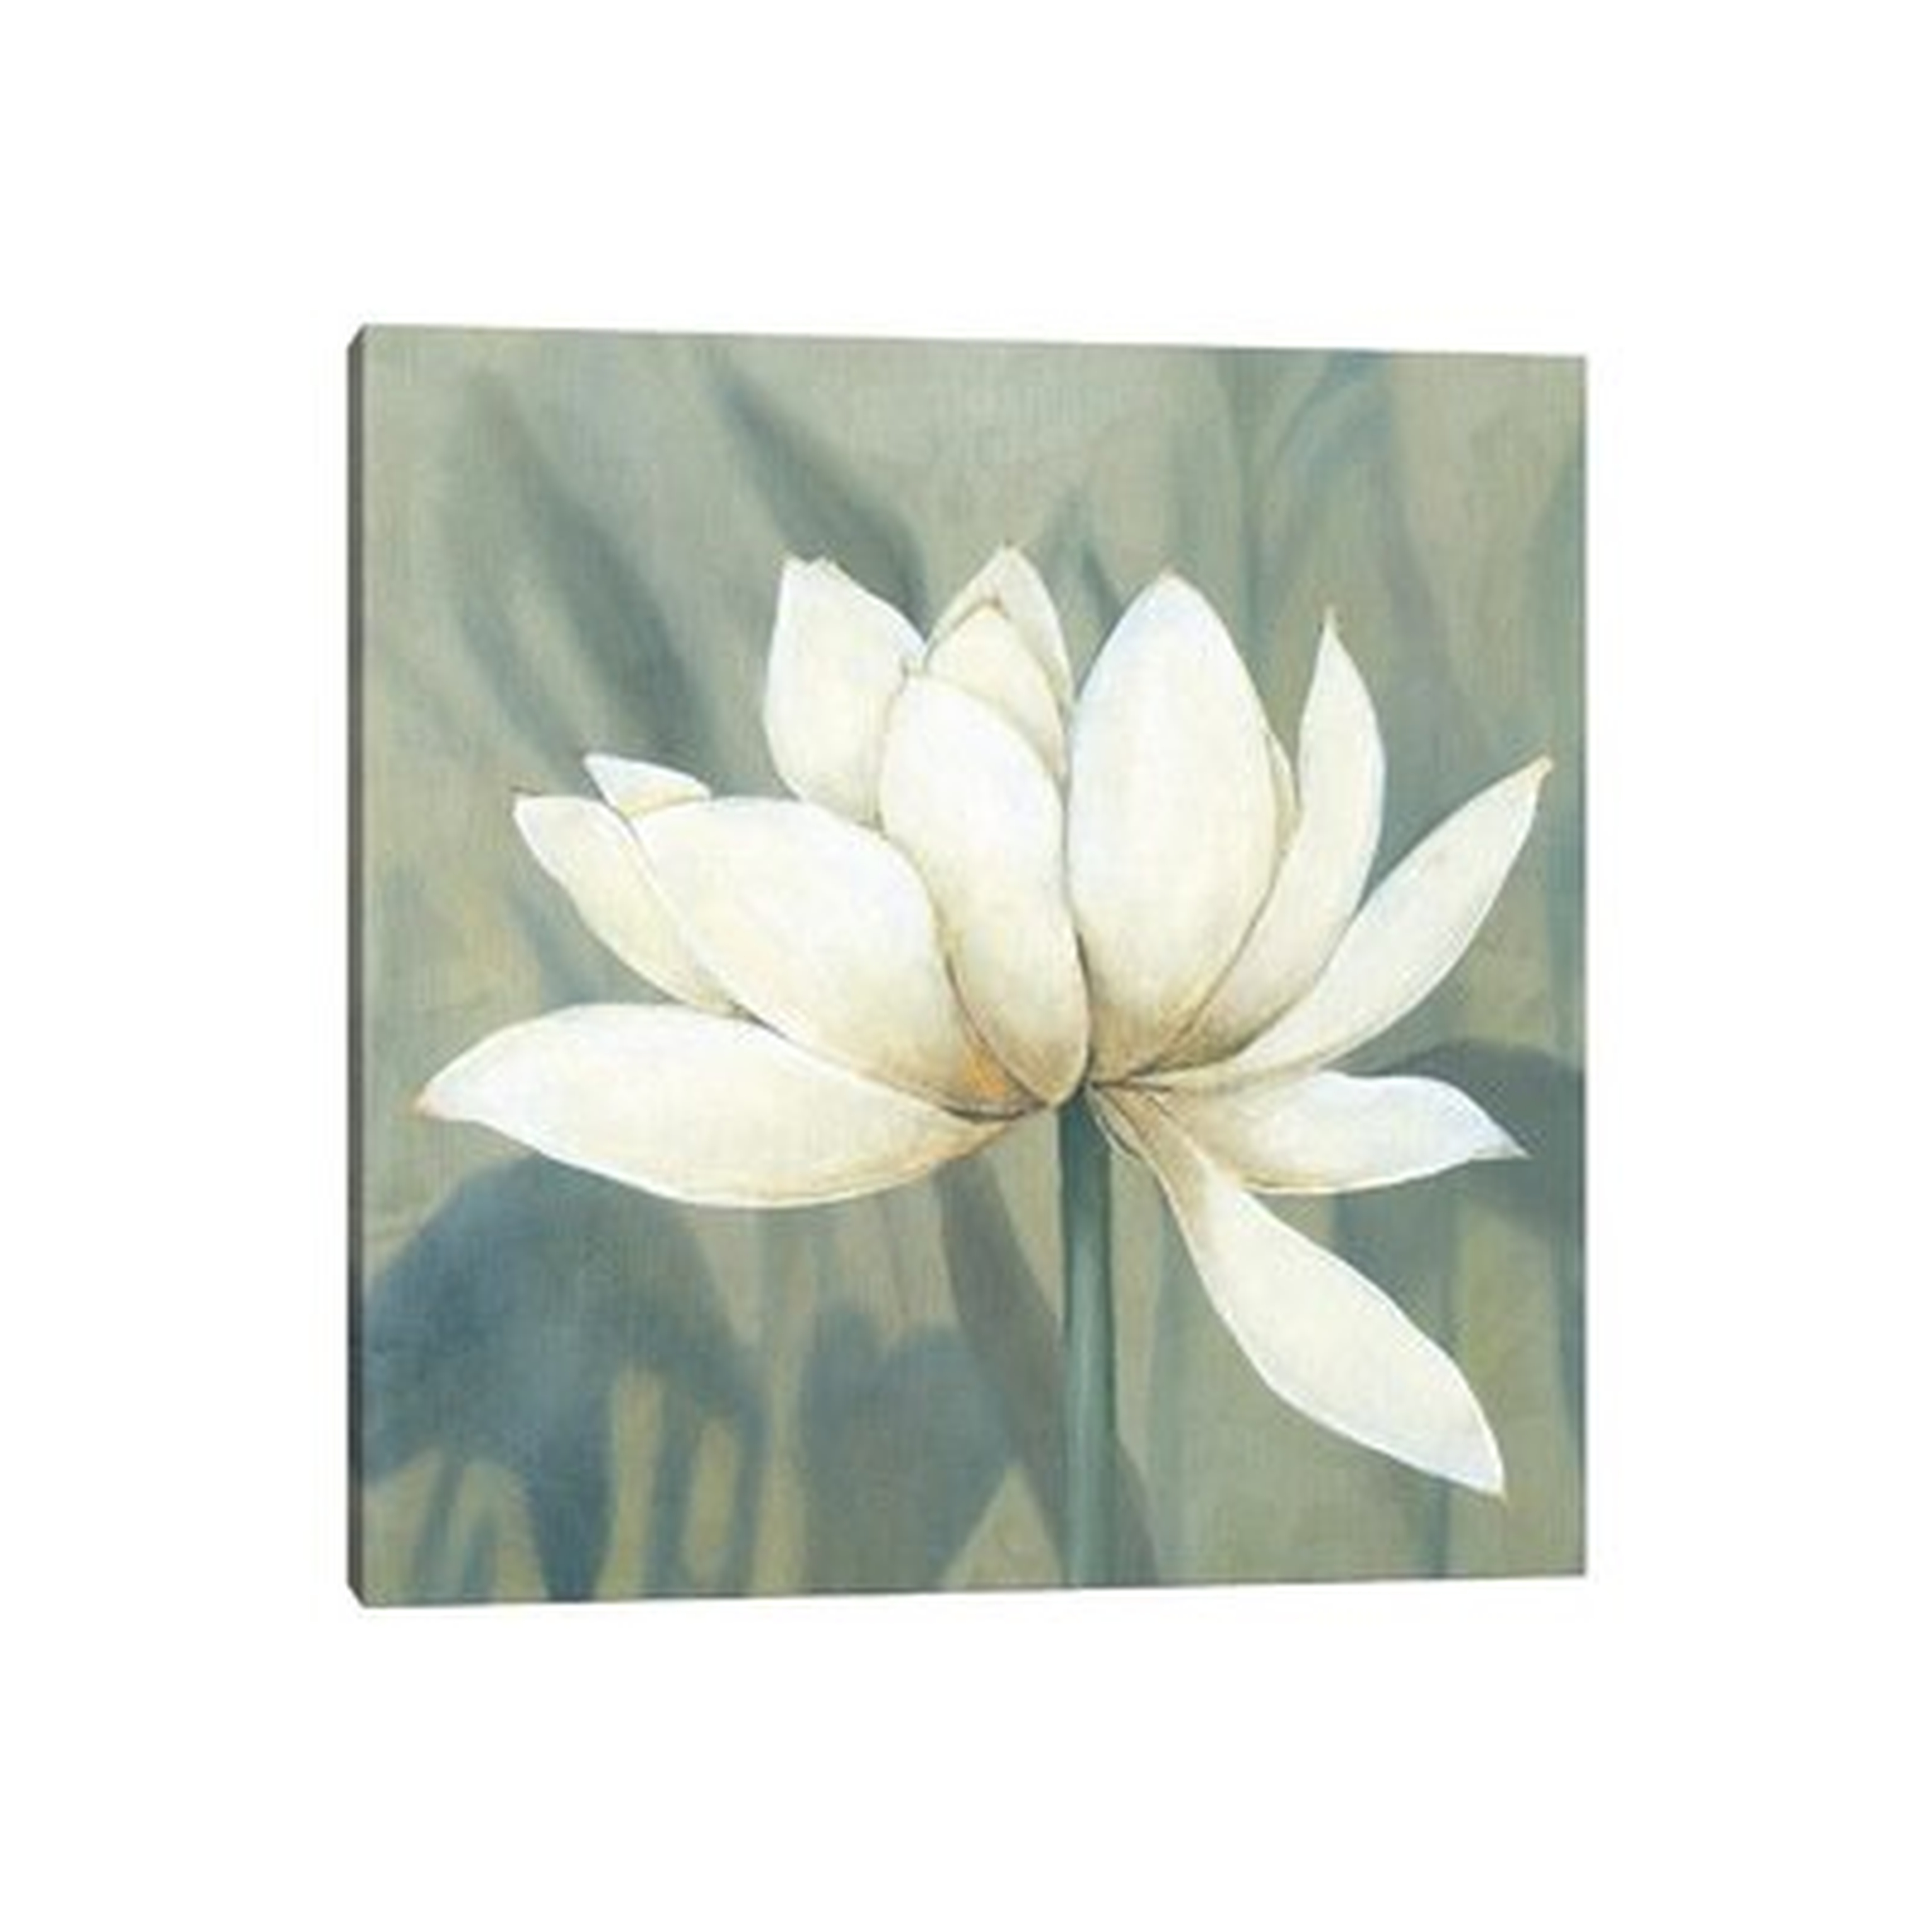 Waterlily II by Carol Robinson - Wrapped Canvas Painting Print - Wayfair